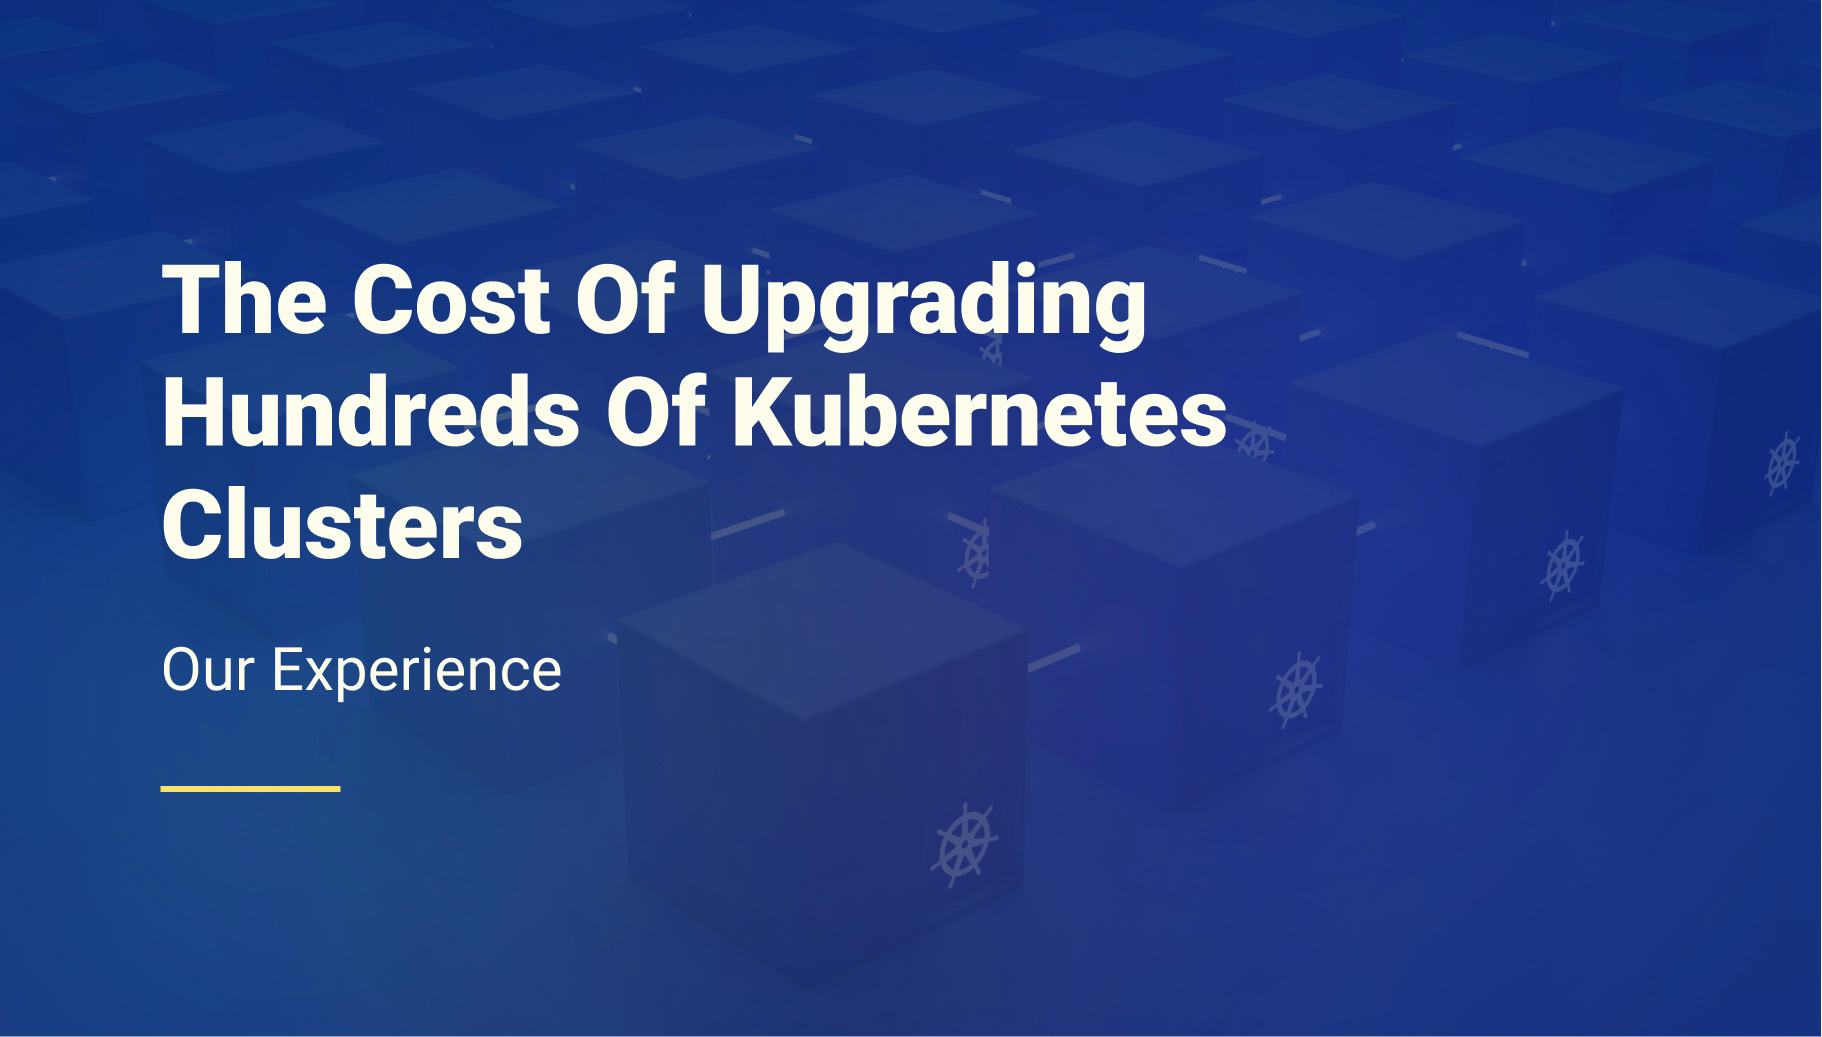 The Cost of Upgrading Hundreds of Kubernetes Clusters - Qovery